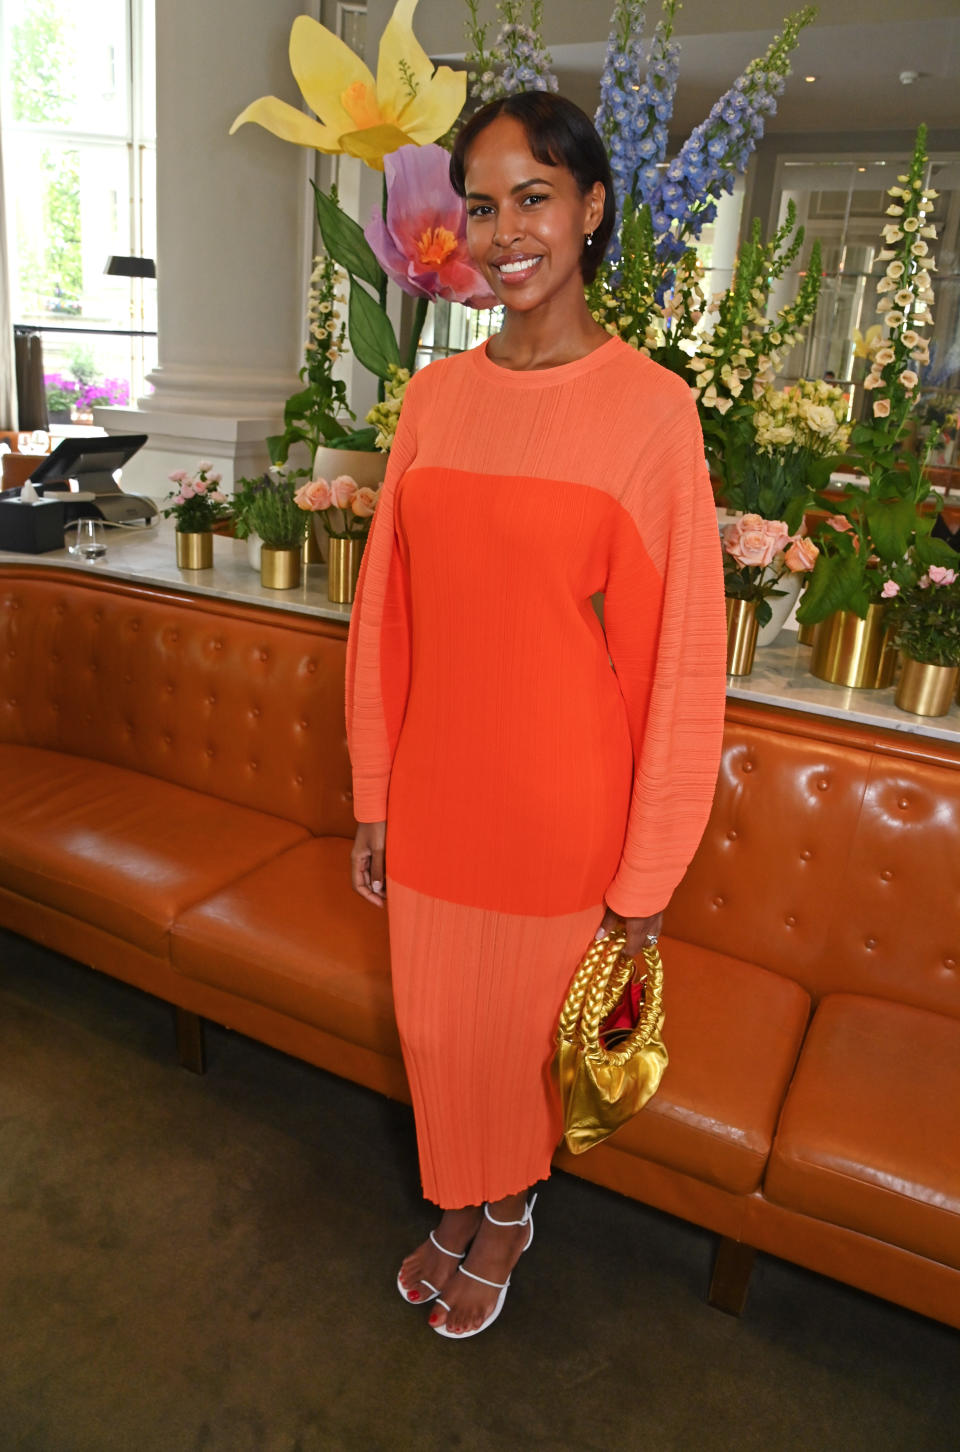 Sabrina Elba Shines in Strappy Sandals at London Luncheon Event ...